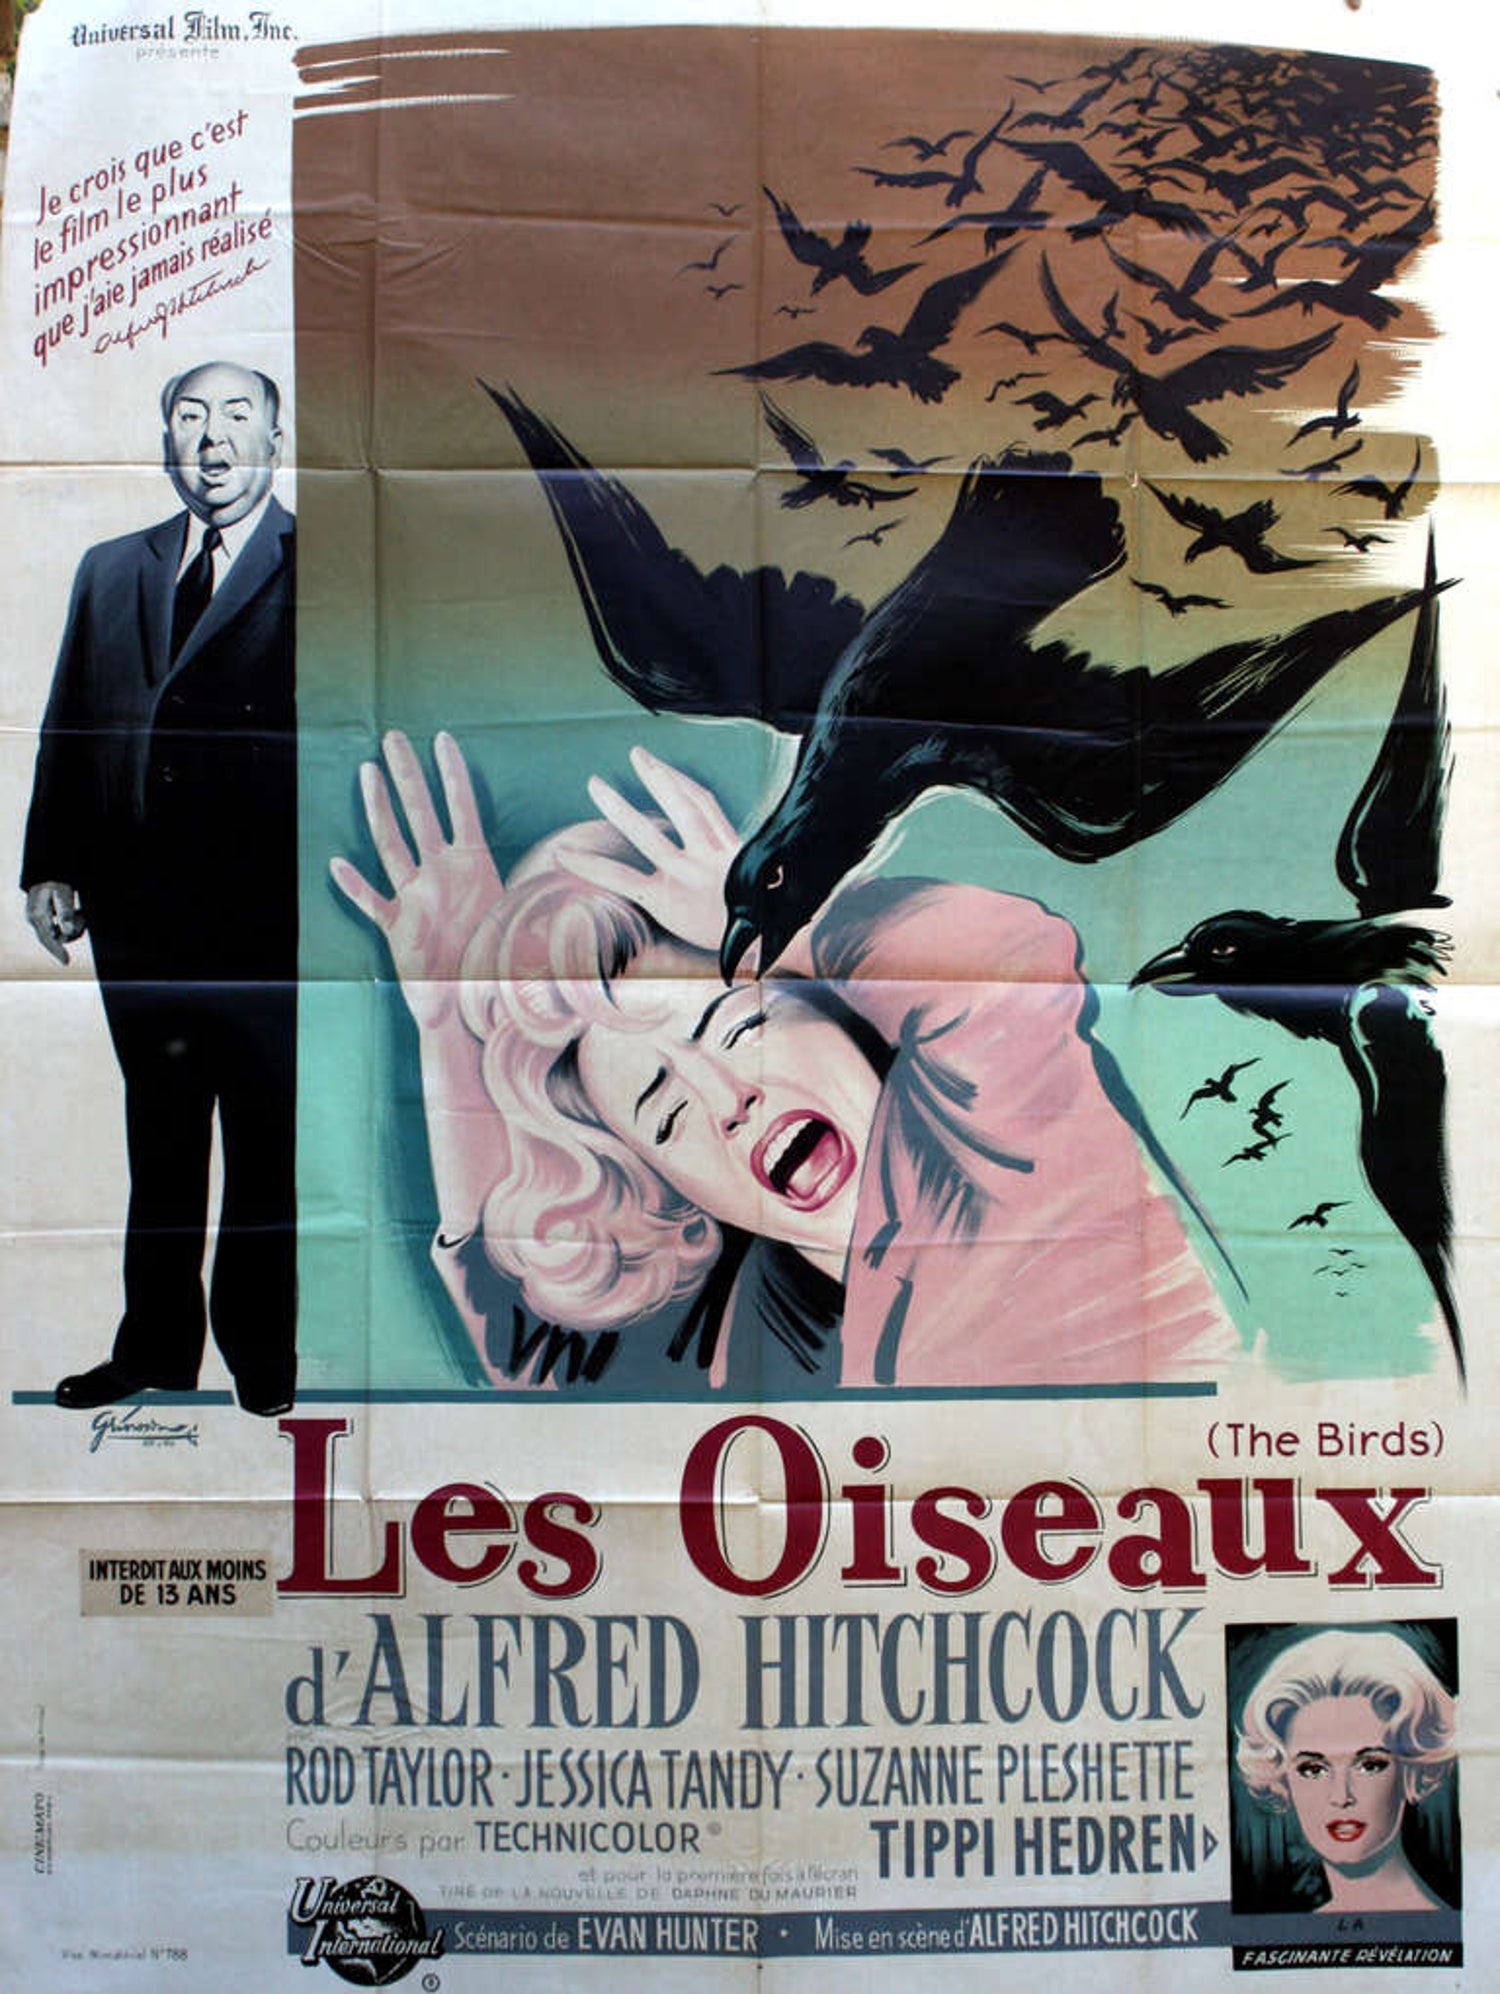 Hitchcock Poster - 5 For Sale on 1stDibs | hitchcock posters, alfred 